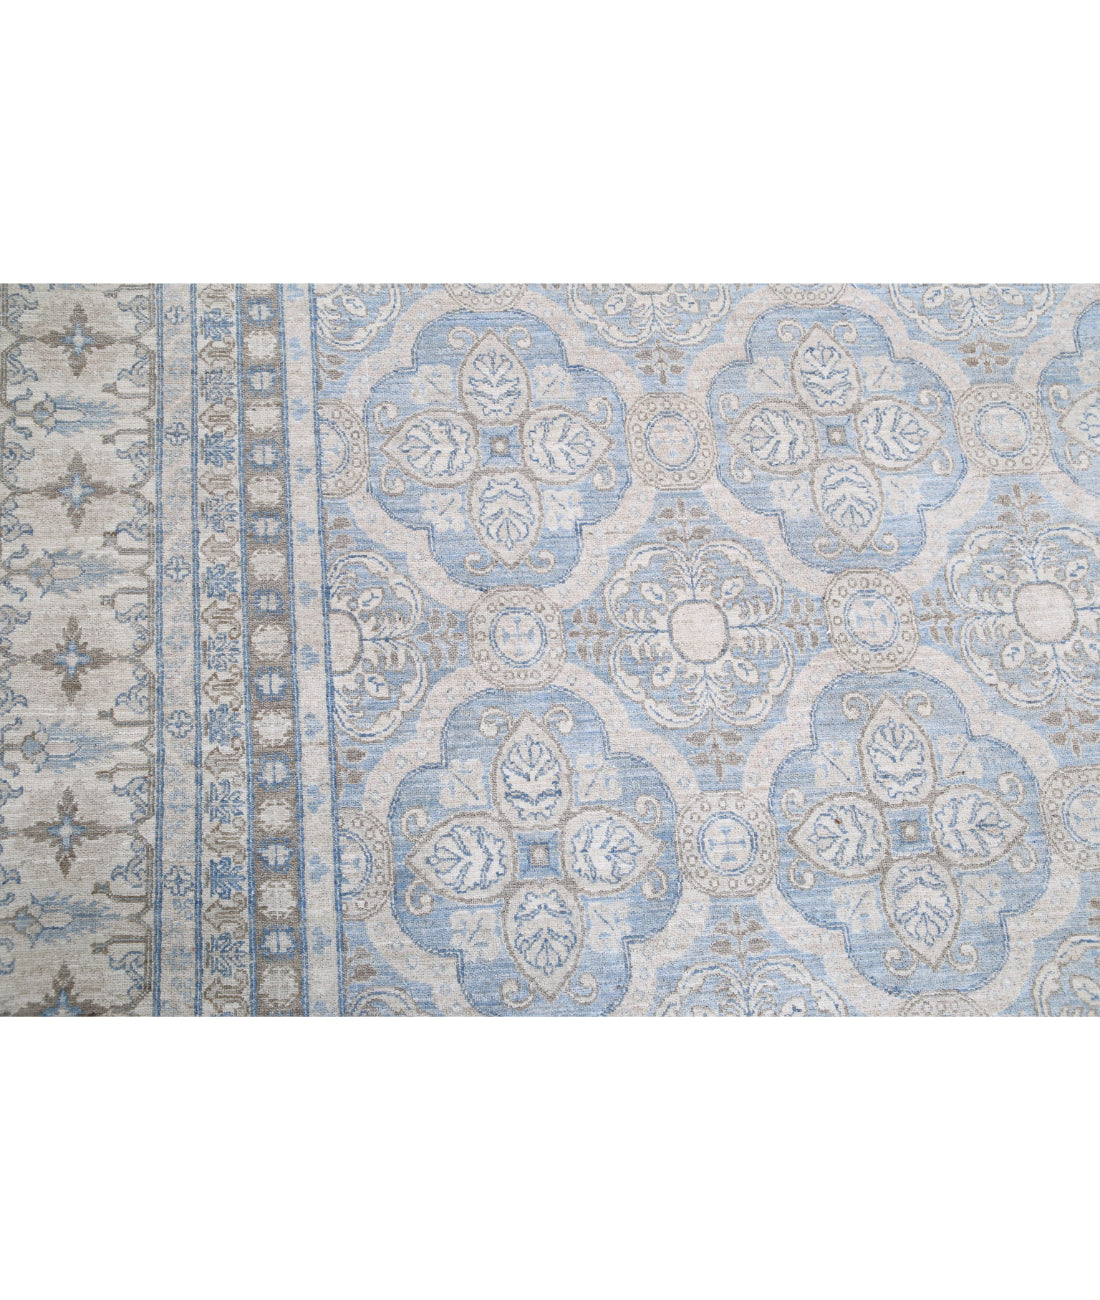 Hand Knotted Serenity Wool Rug - 14'1'' x 18'9'' 14'1'' x 18'9'' (423 X 563) / Blue / Ivory